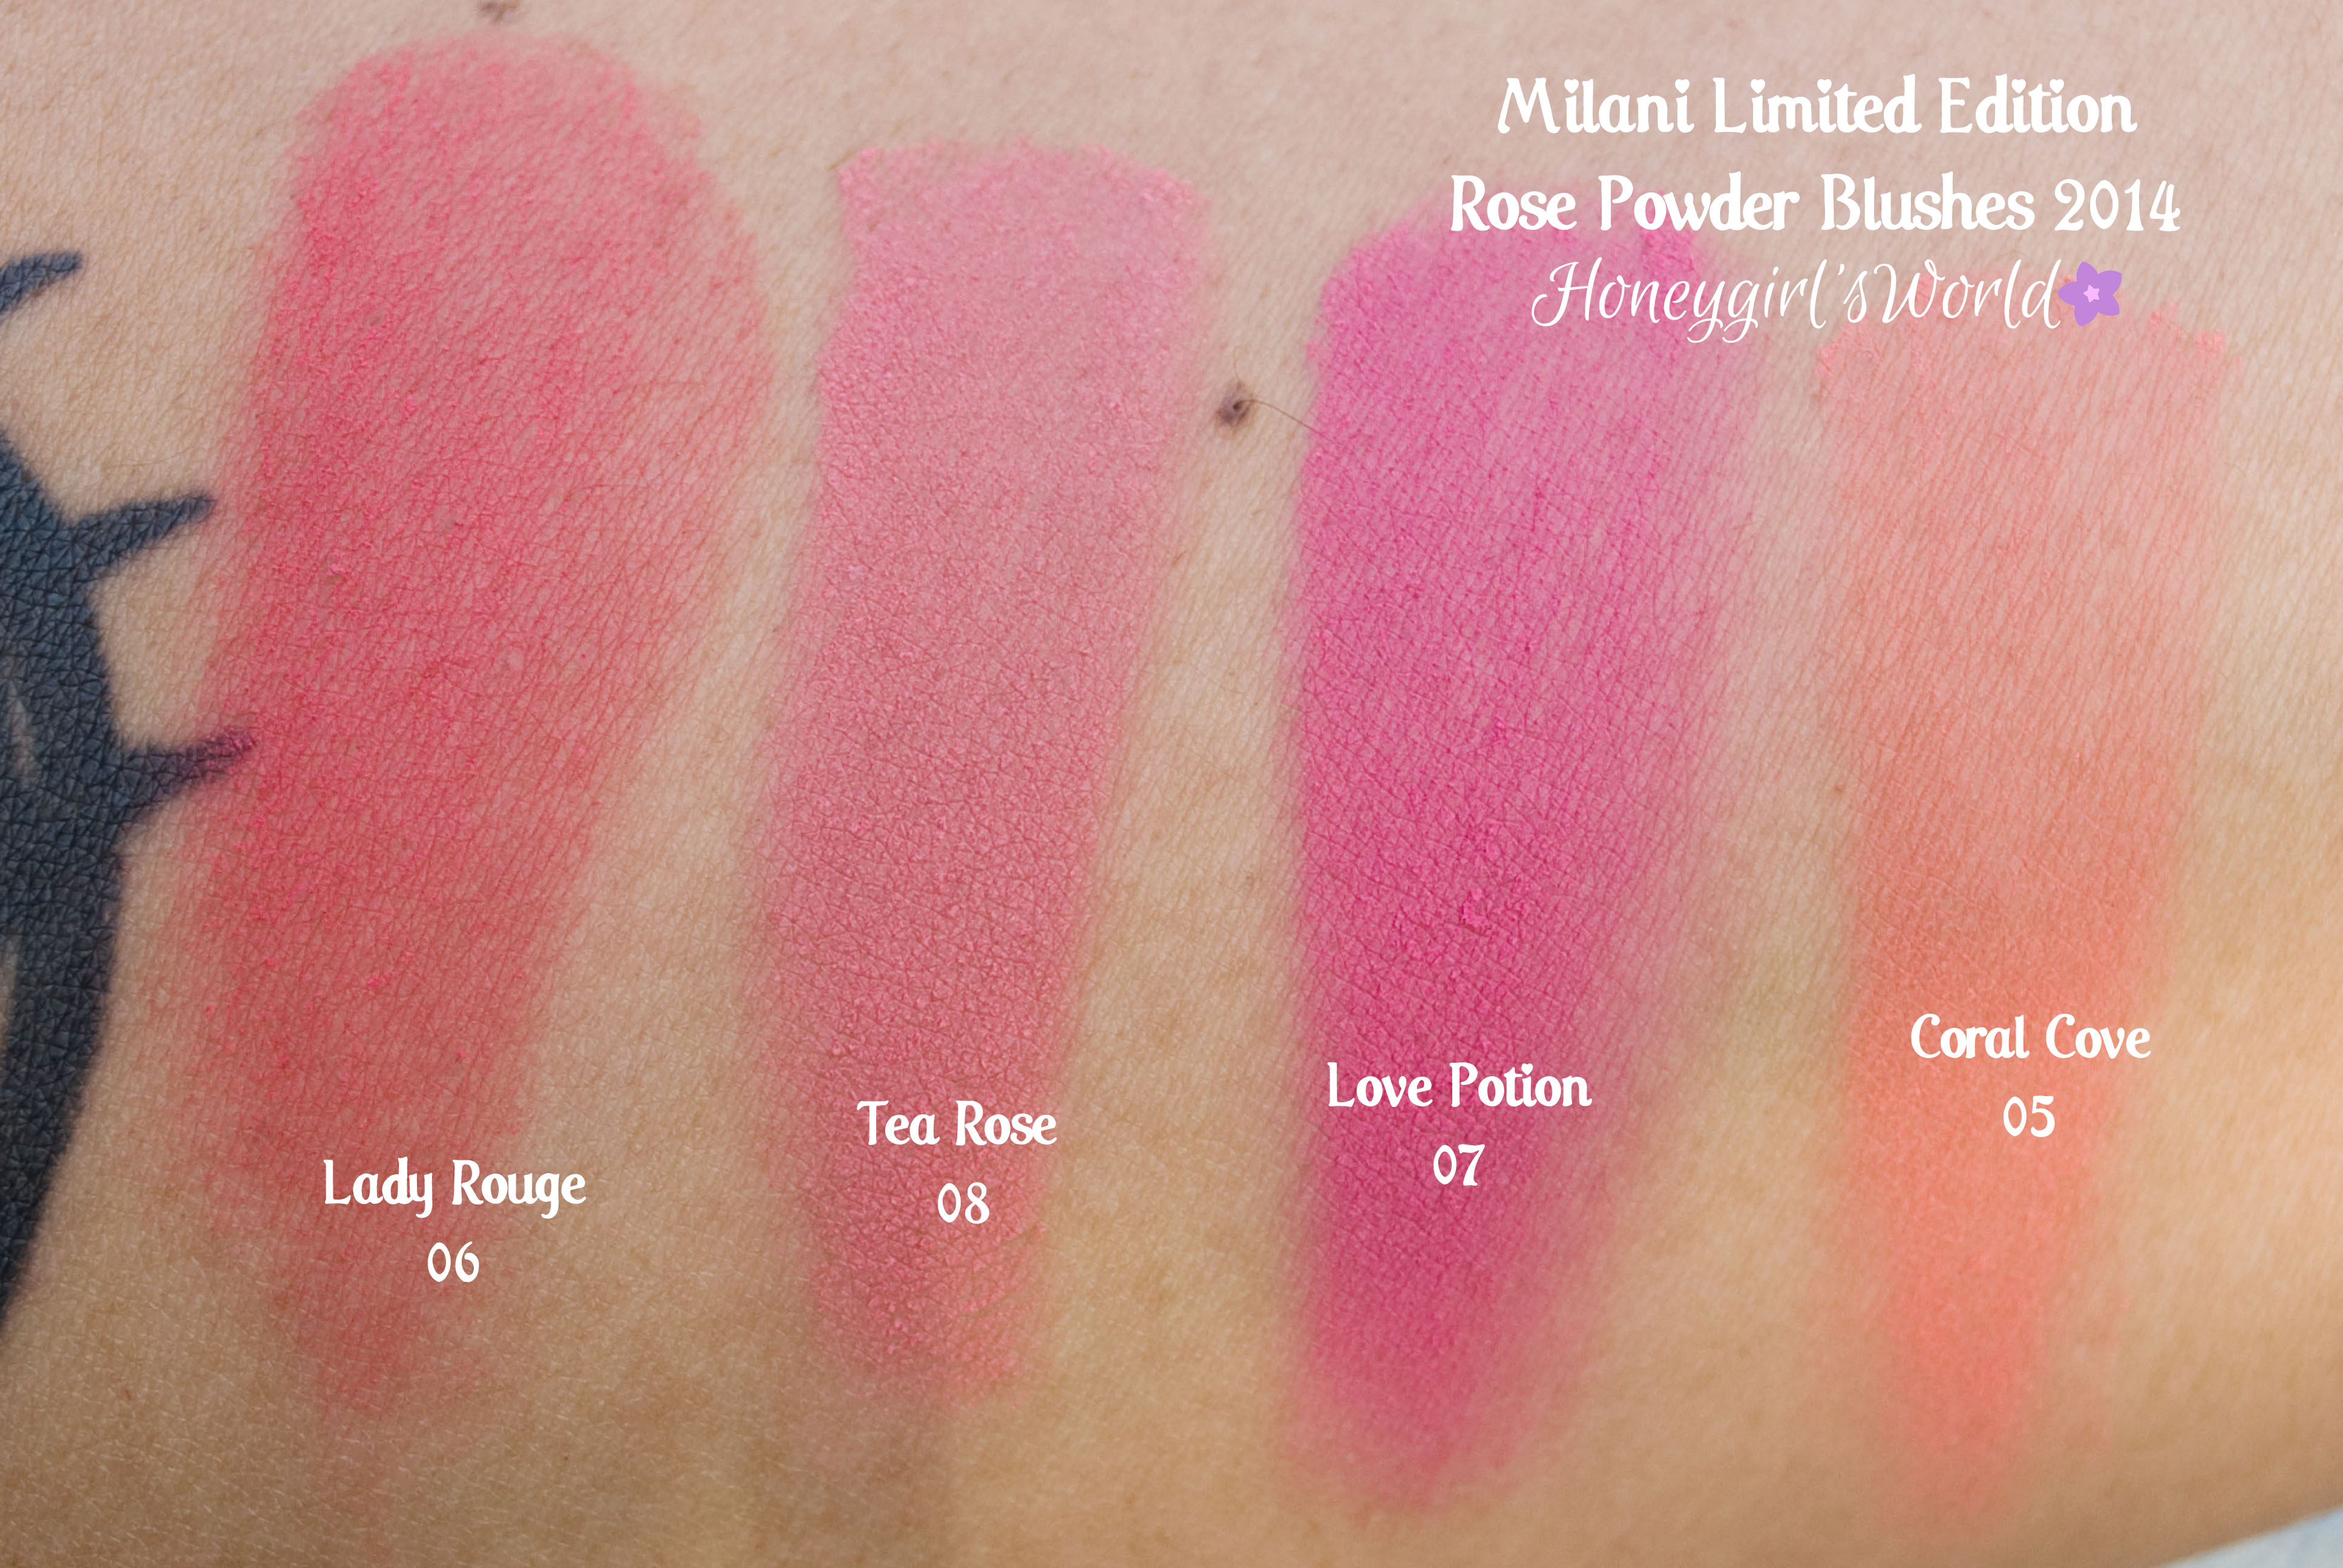 Swatches of the Milani Rose Powder Blushes 2014